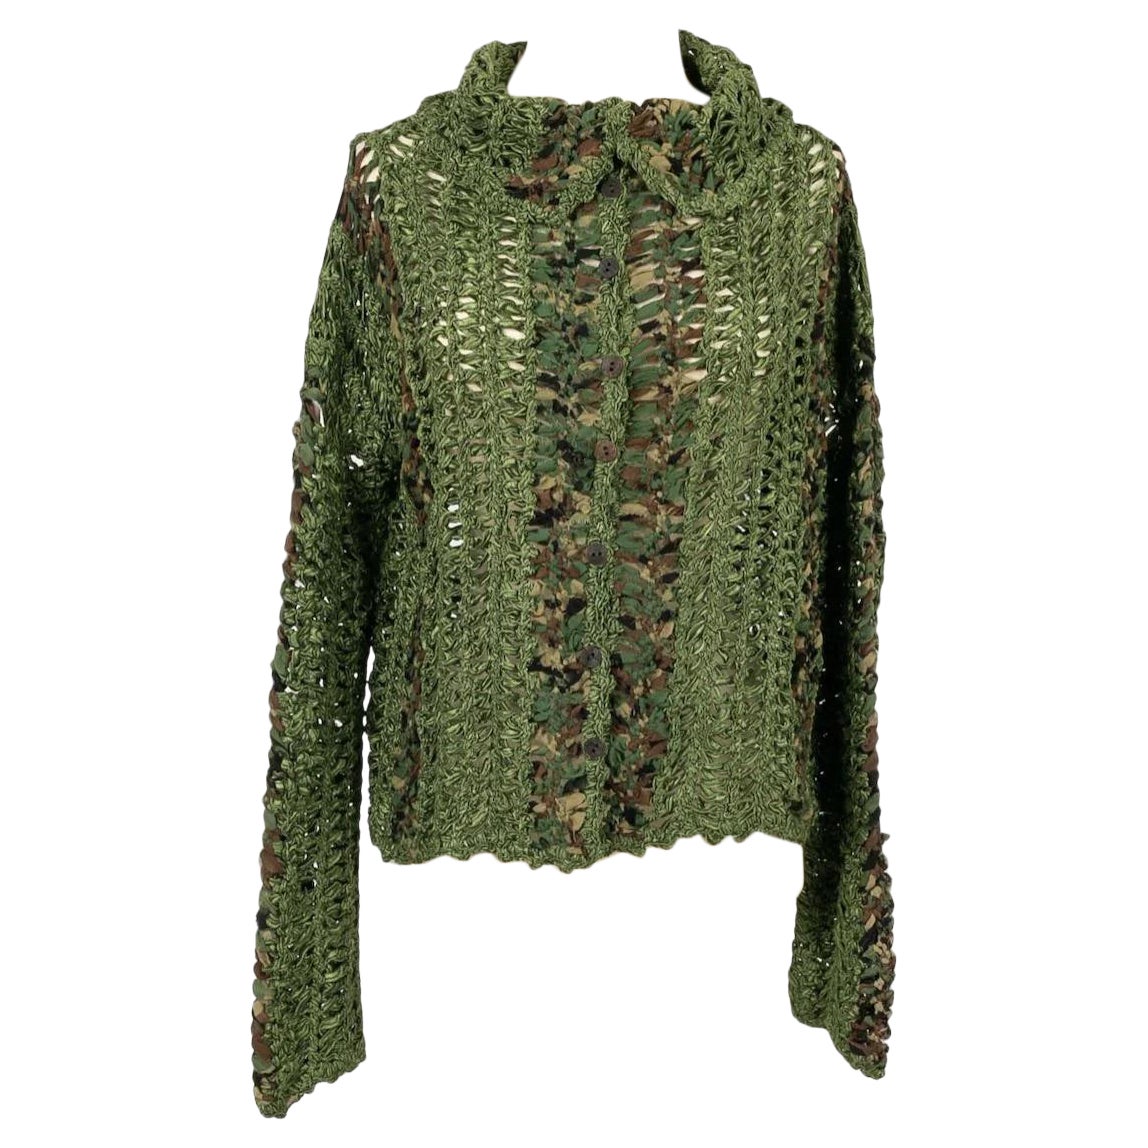 Christian Dior Vest in Shades of Green and Camouflage Pattern For Sale